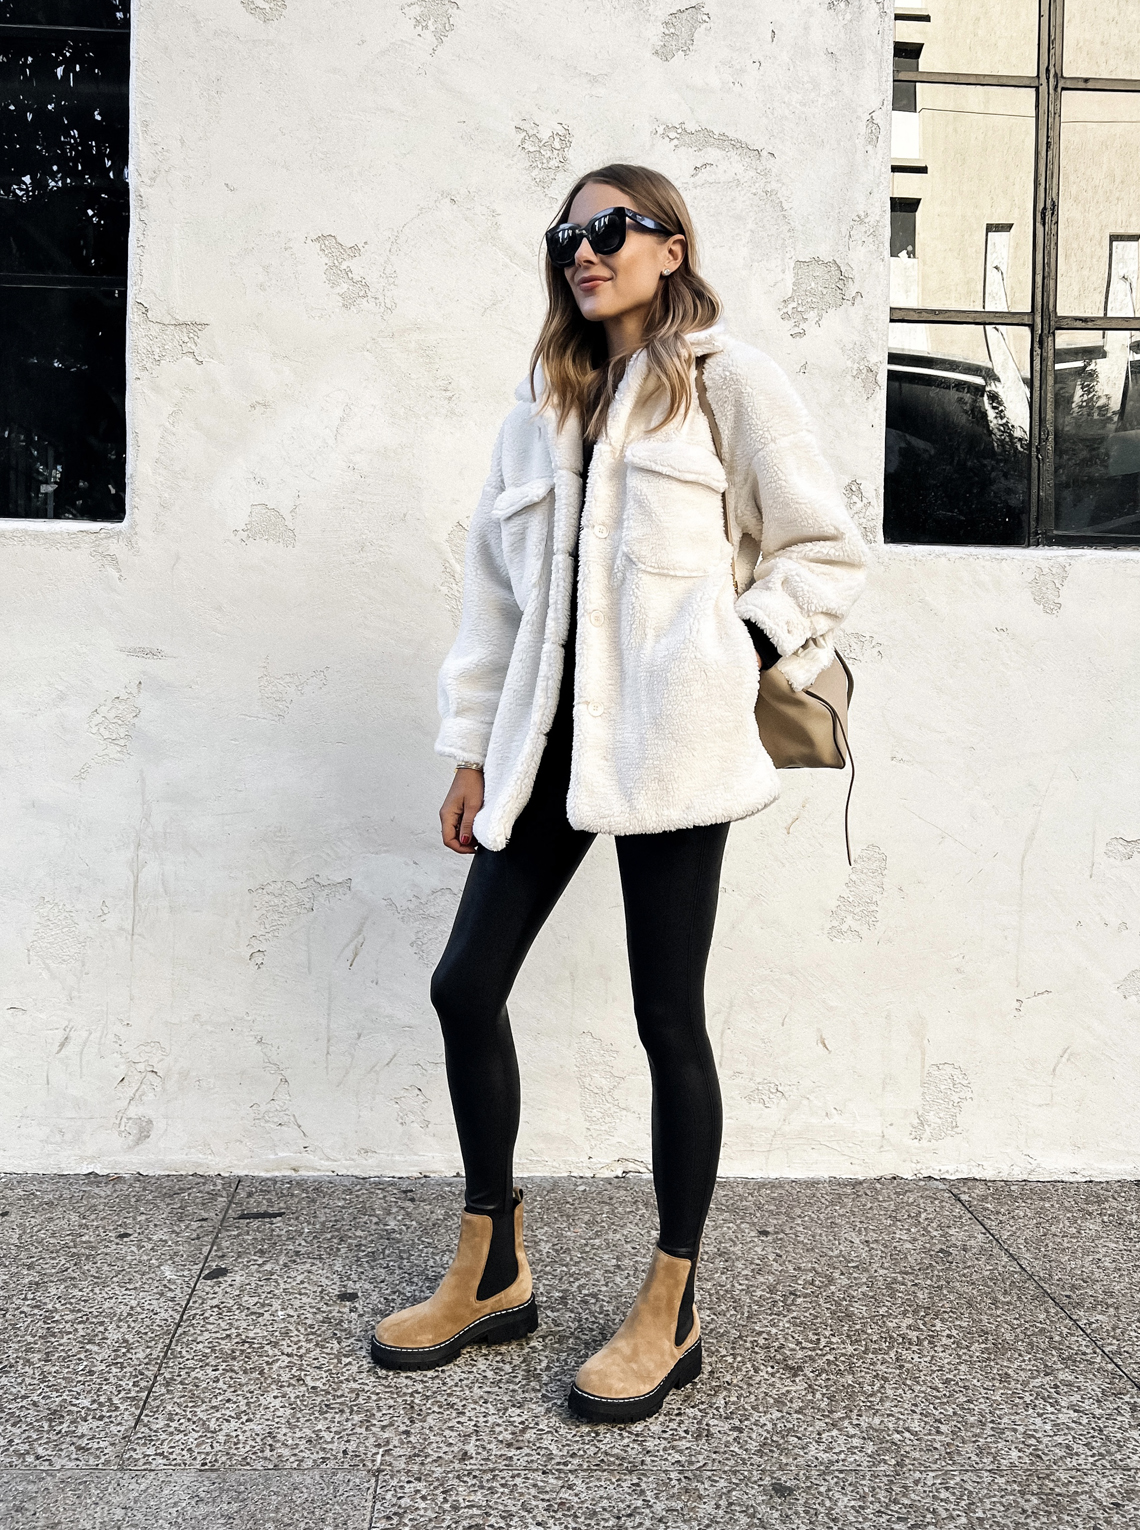 Fashion-Jackson-Wearing-White-Fleece-Sherpa-Jacket-Spanx-Faux-Leather-Leggings-Brown-Lug-Sole-Boots-Fall-Outfit